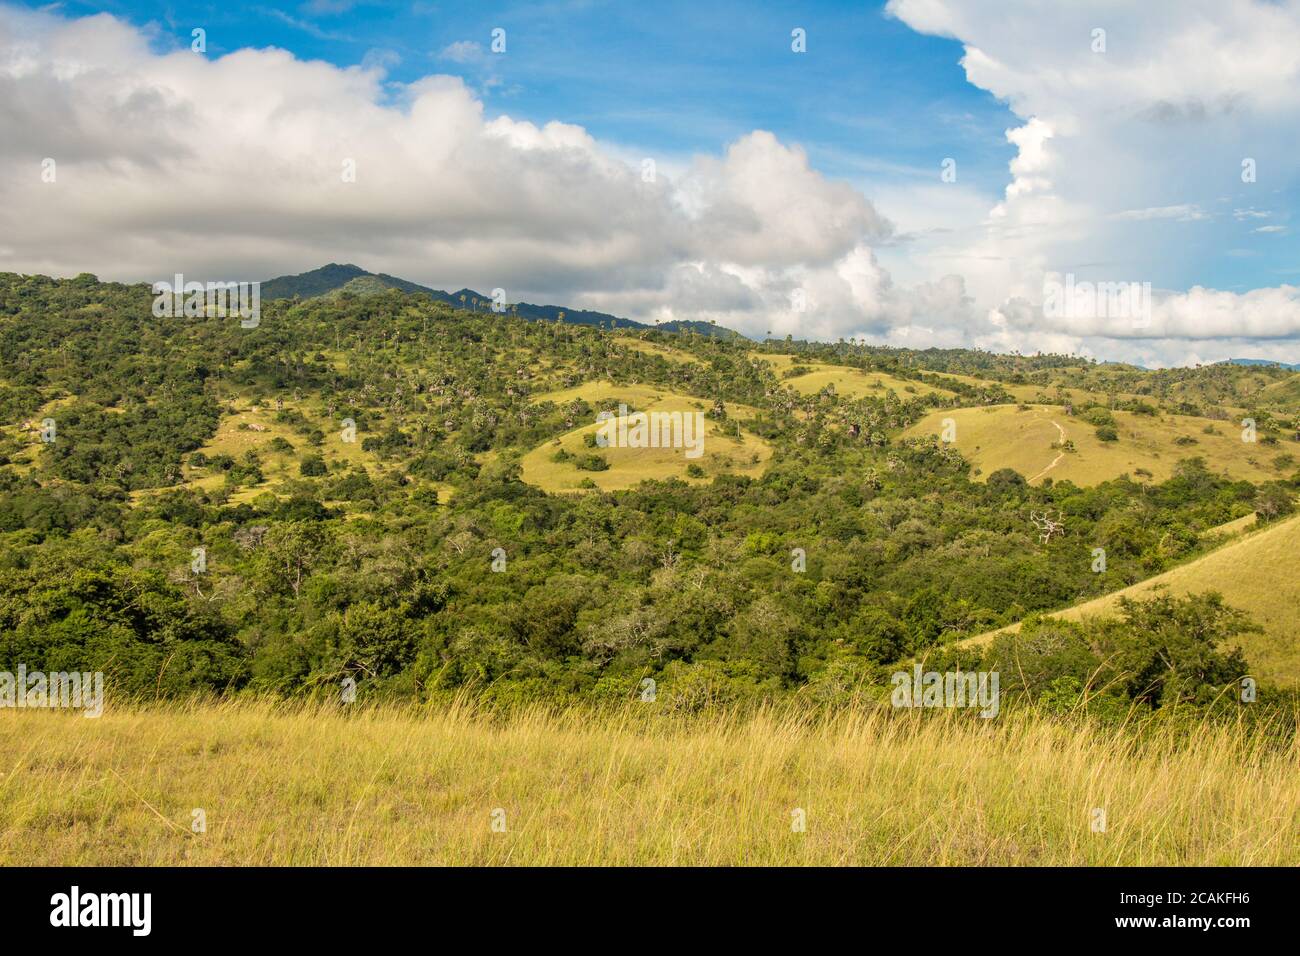 The landscape of grassland and shrubs, on Rinca Island in Komodo National Park in Flores, Indonesia Stock Photo